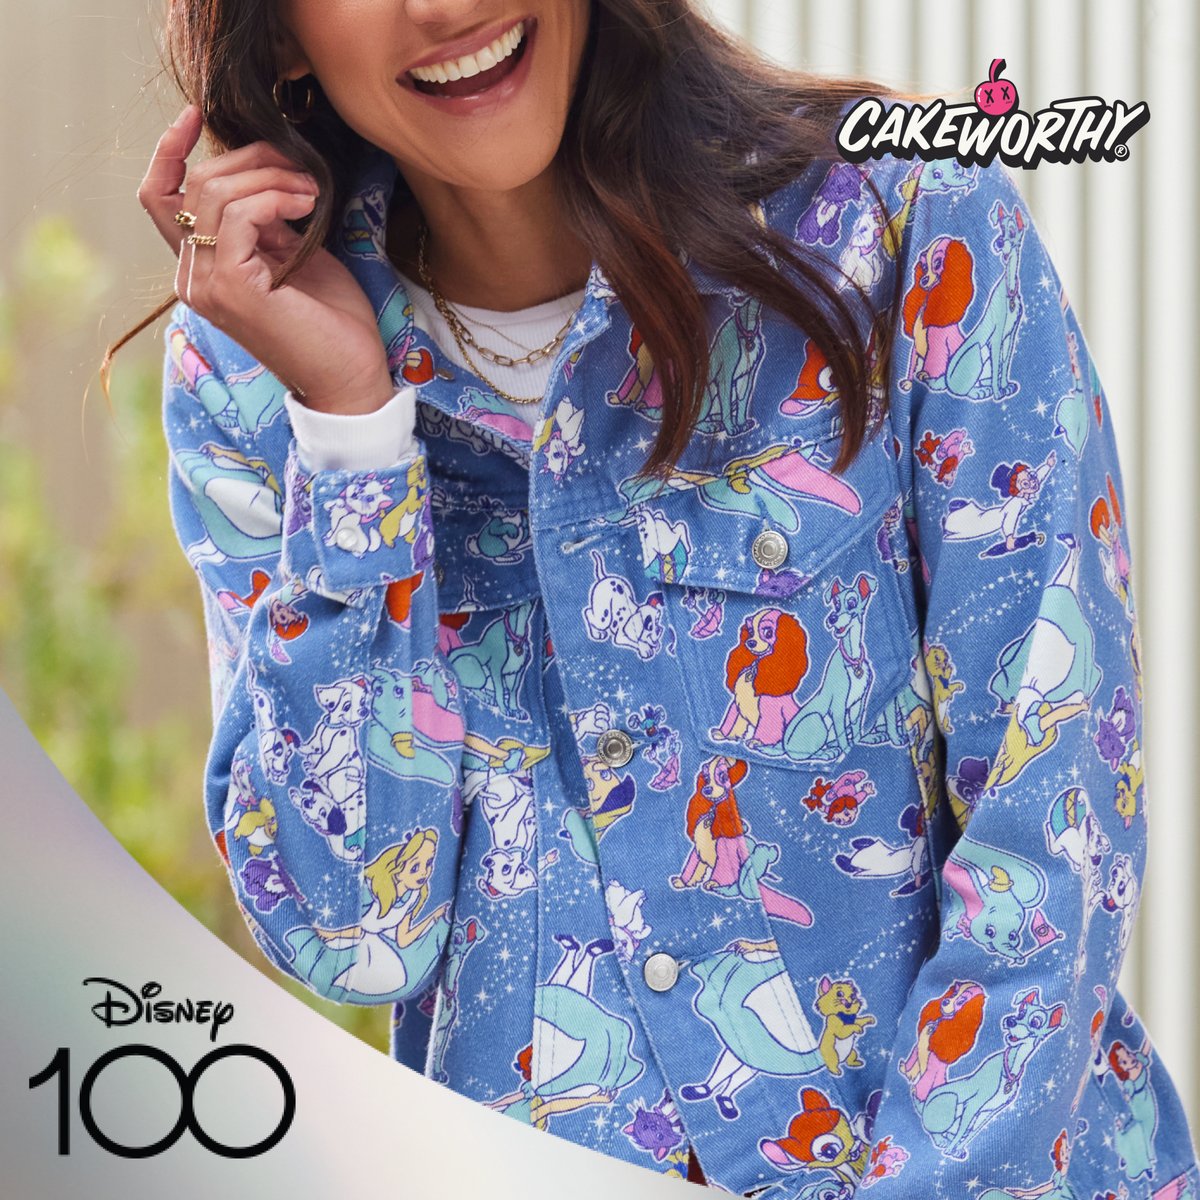 This just-dropped #Disney100 jacket is a denim dream come true! di.sn/6016uvyz6